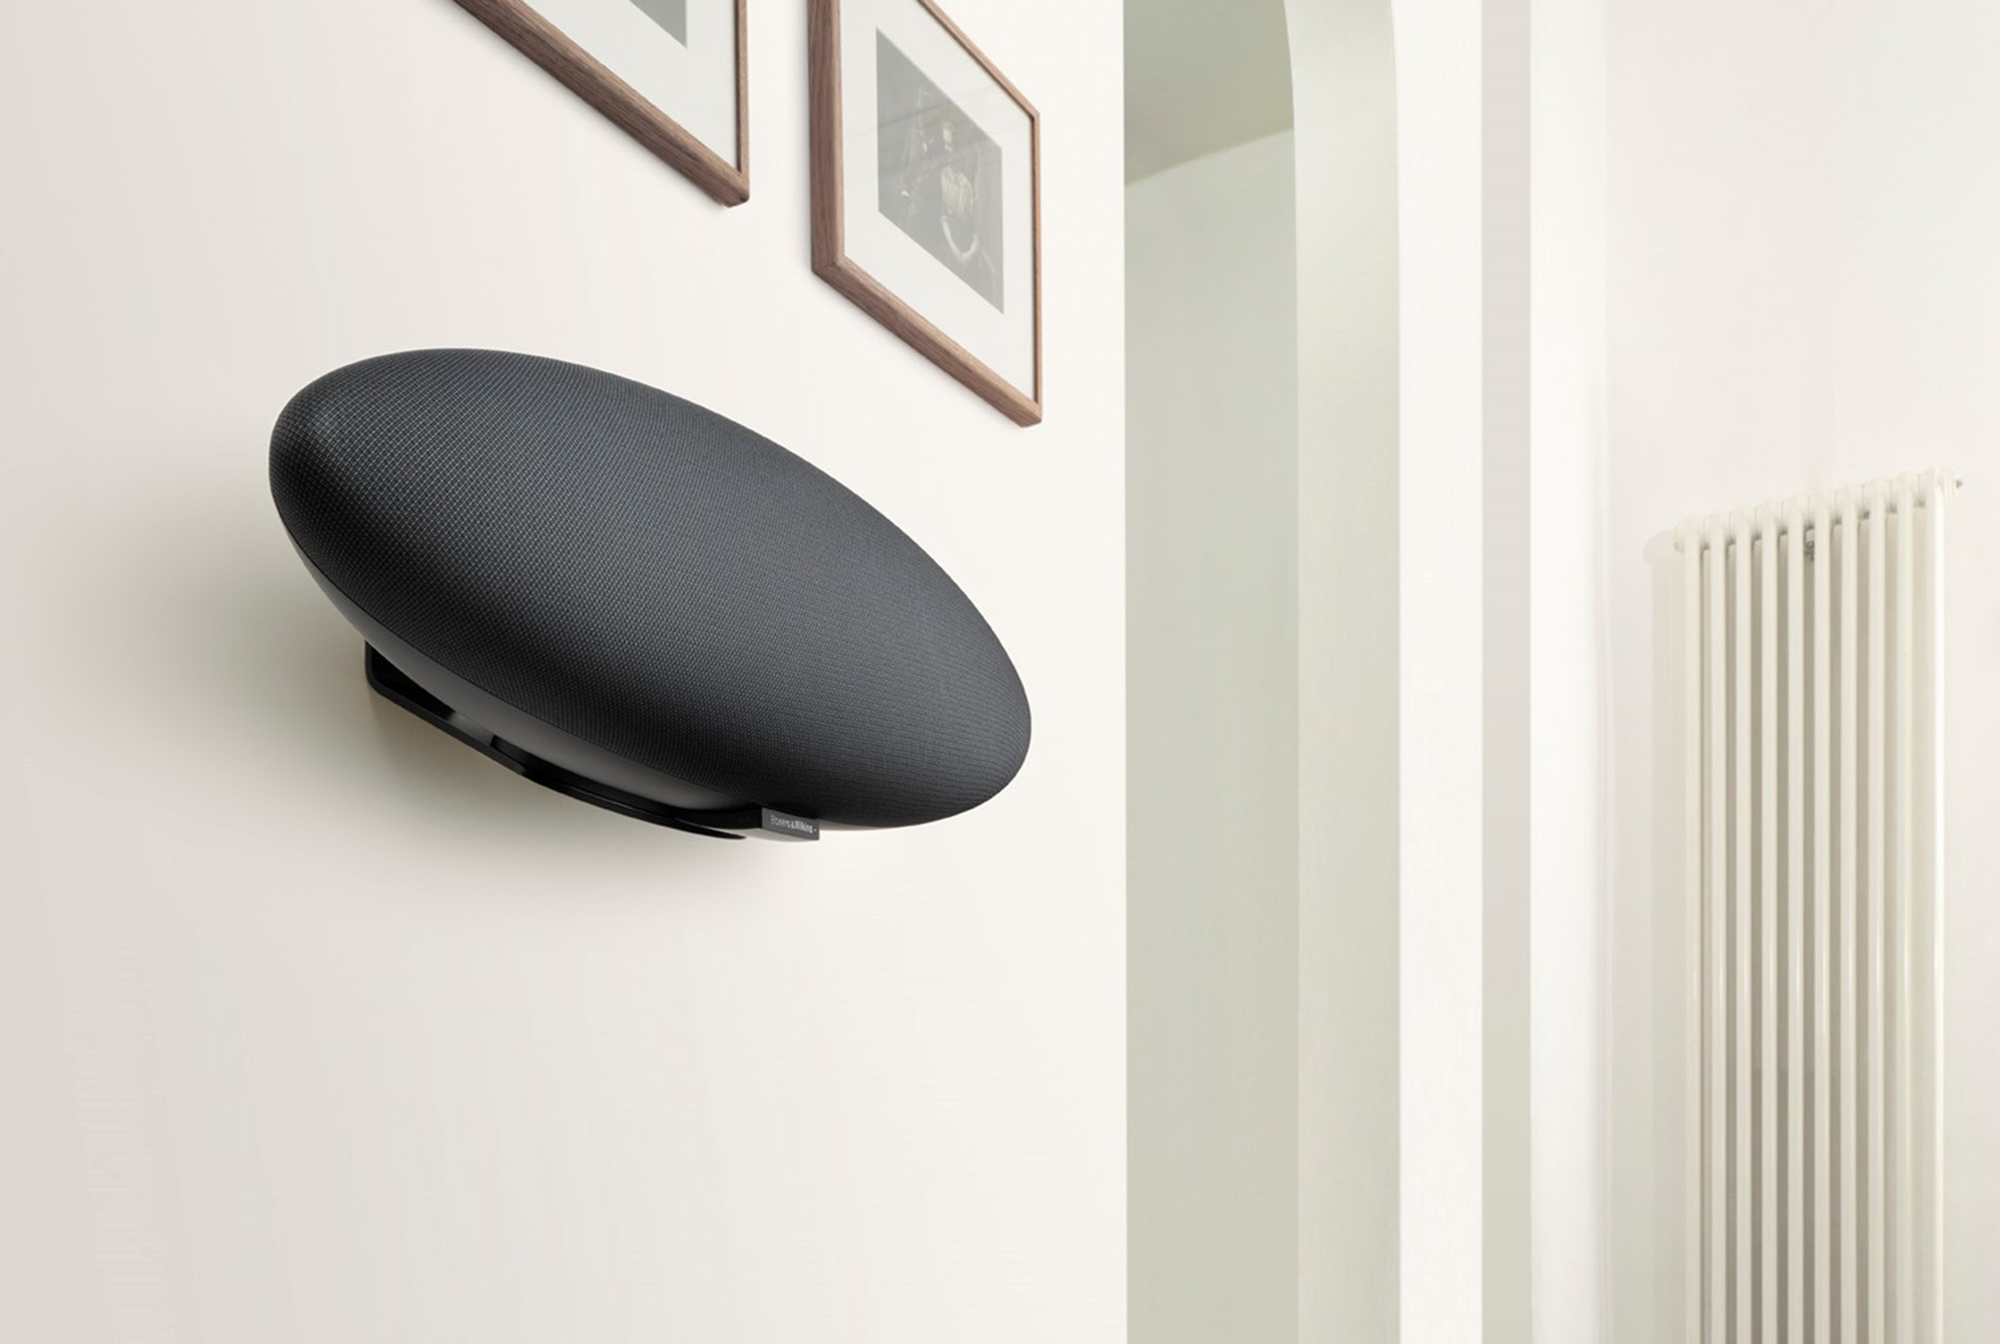 Bowers & Wilkins Zeppelin mounted on a white wall